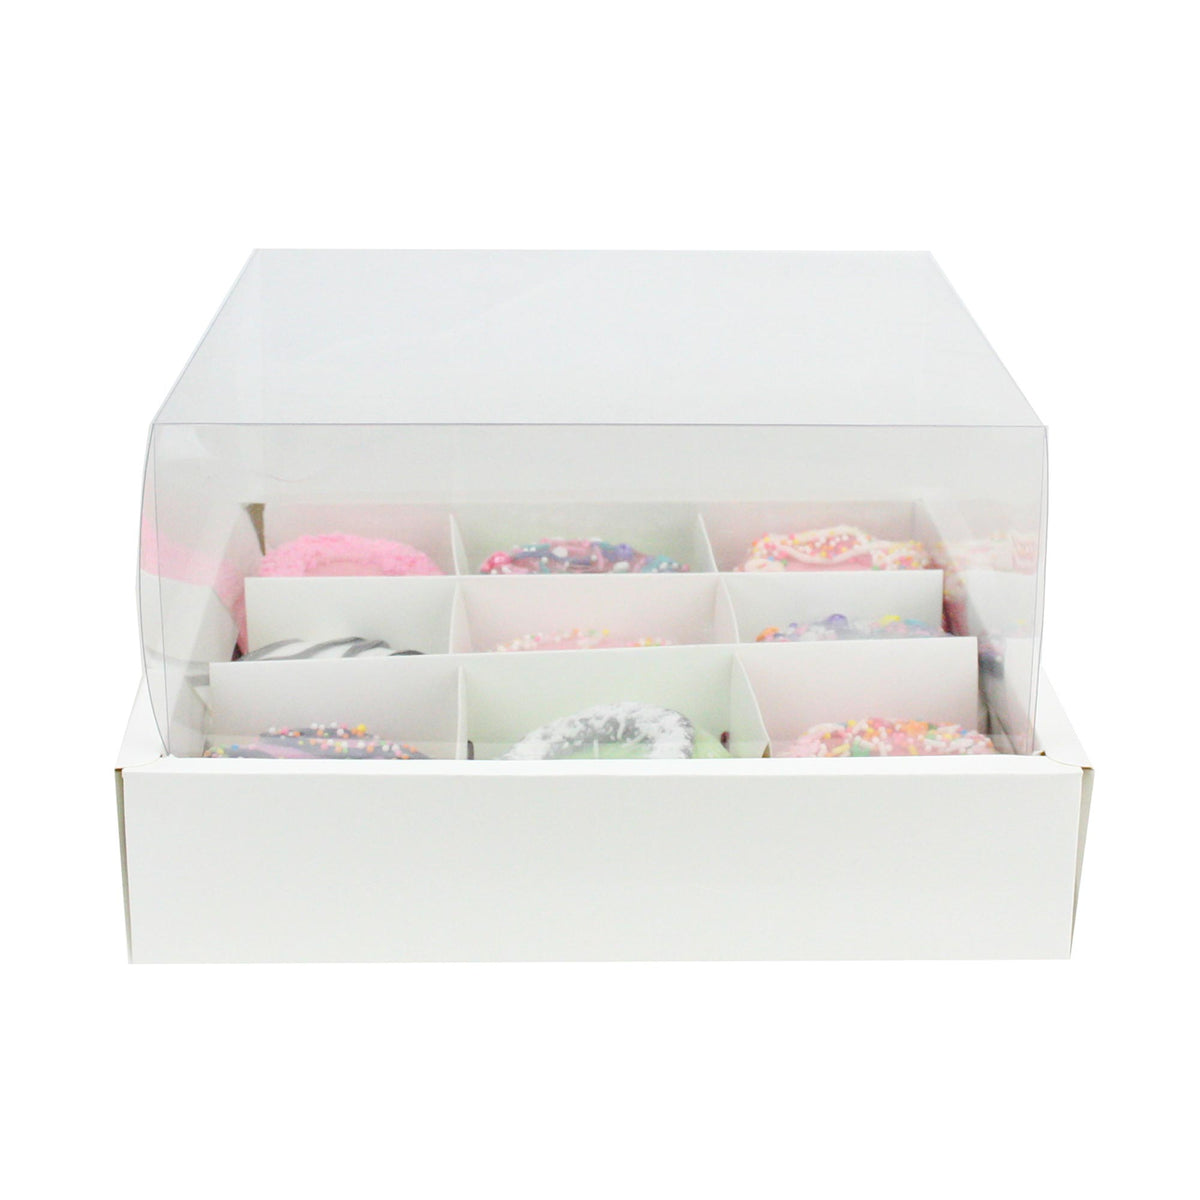 Pack of 12 White Cupcake Box with Clear Lid - Holds 9 Cupcakes